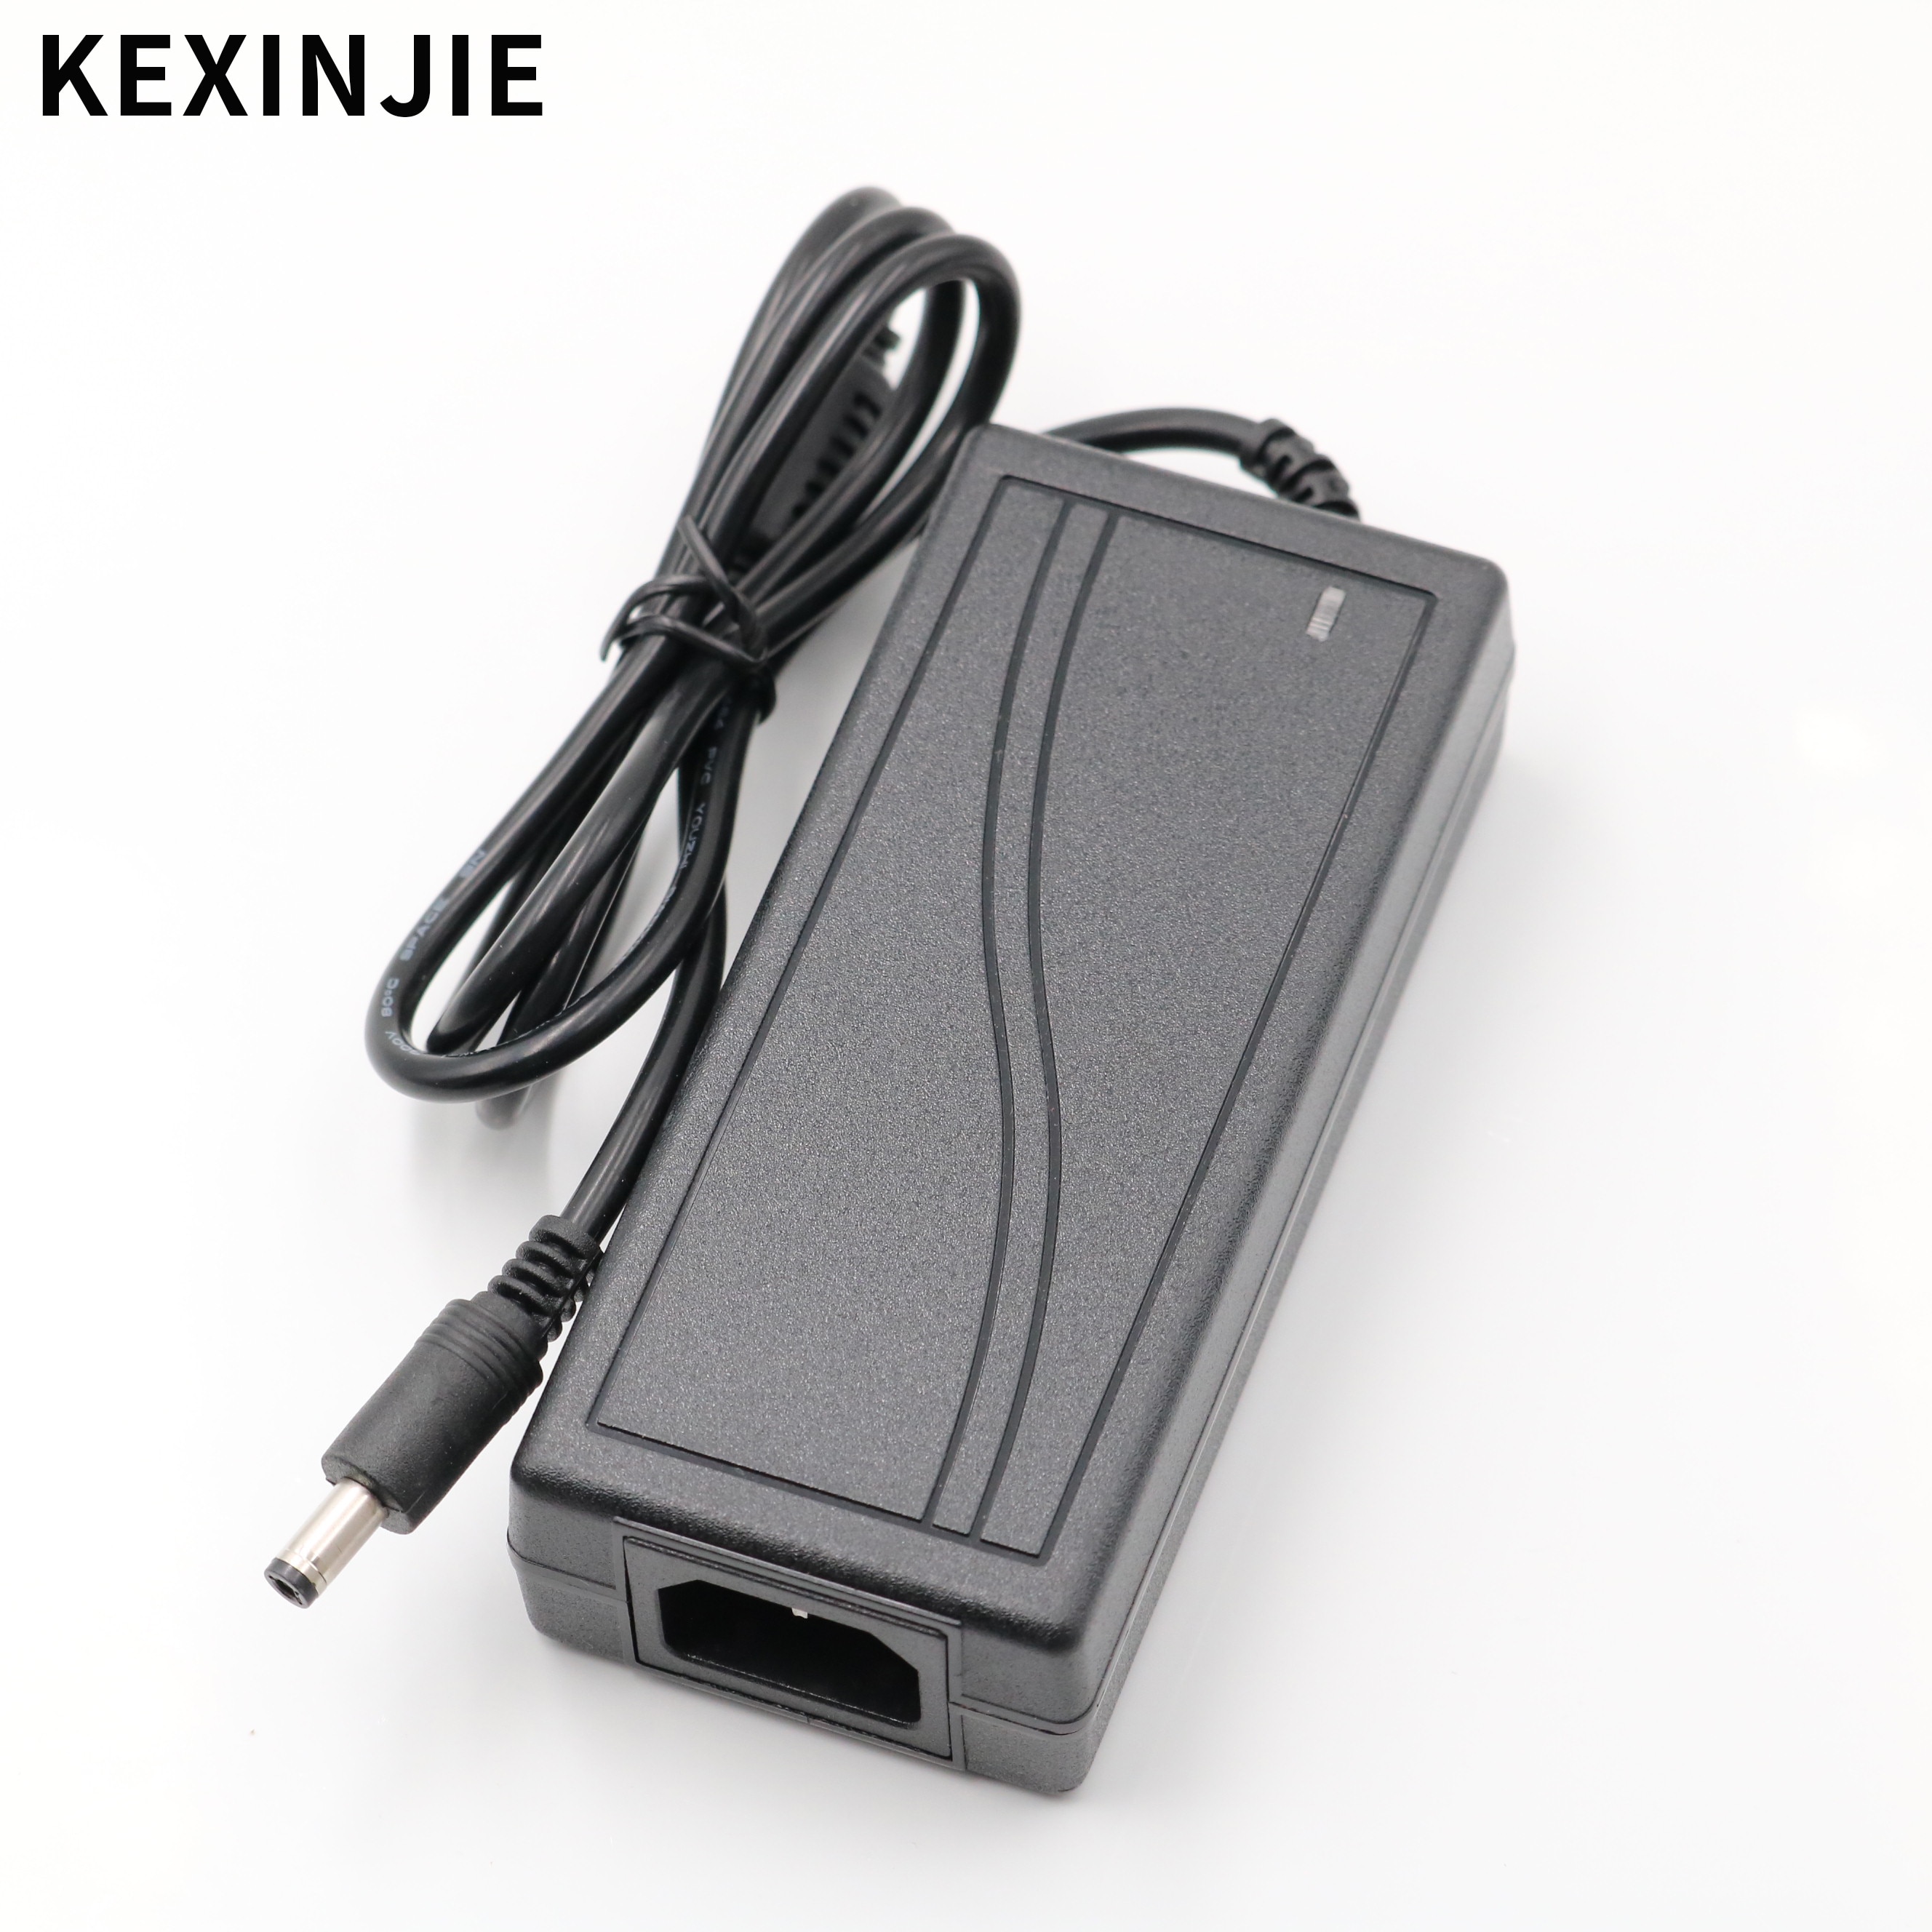 12V5A Ac 100V-240V 60W Converter Power Adapter Dc 12V 5A Led Voeding Adapter charger Dc 5.5x2.5mm